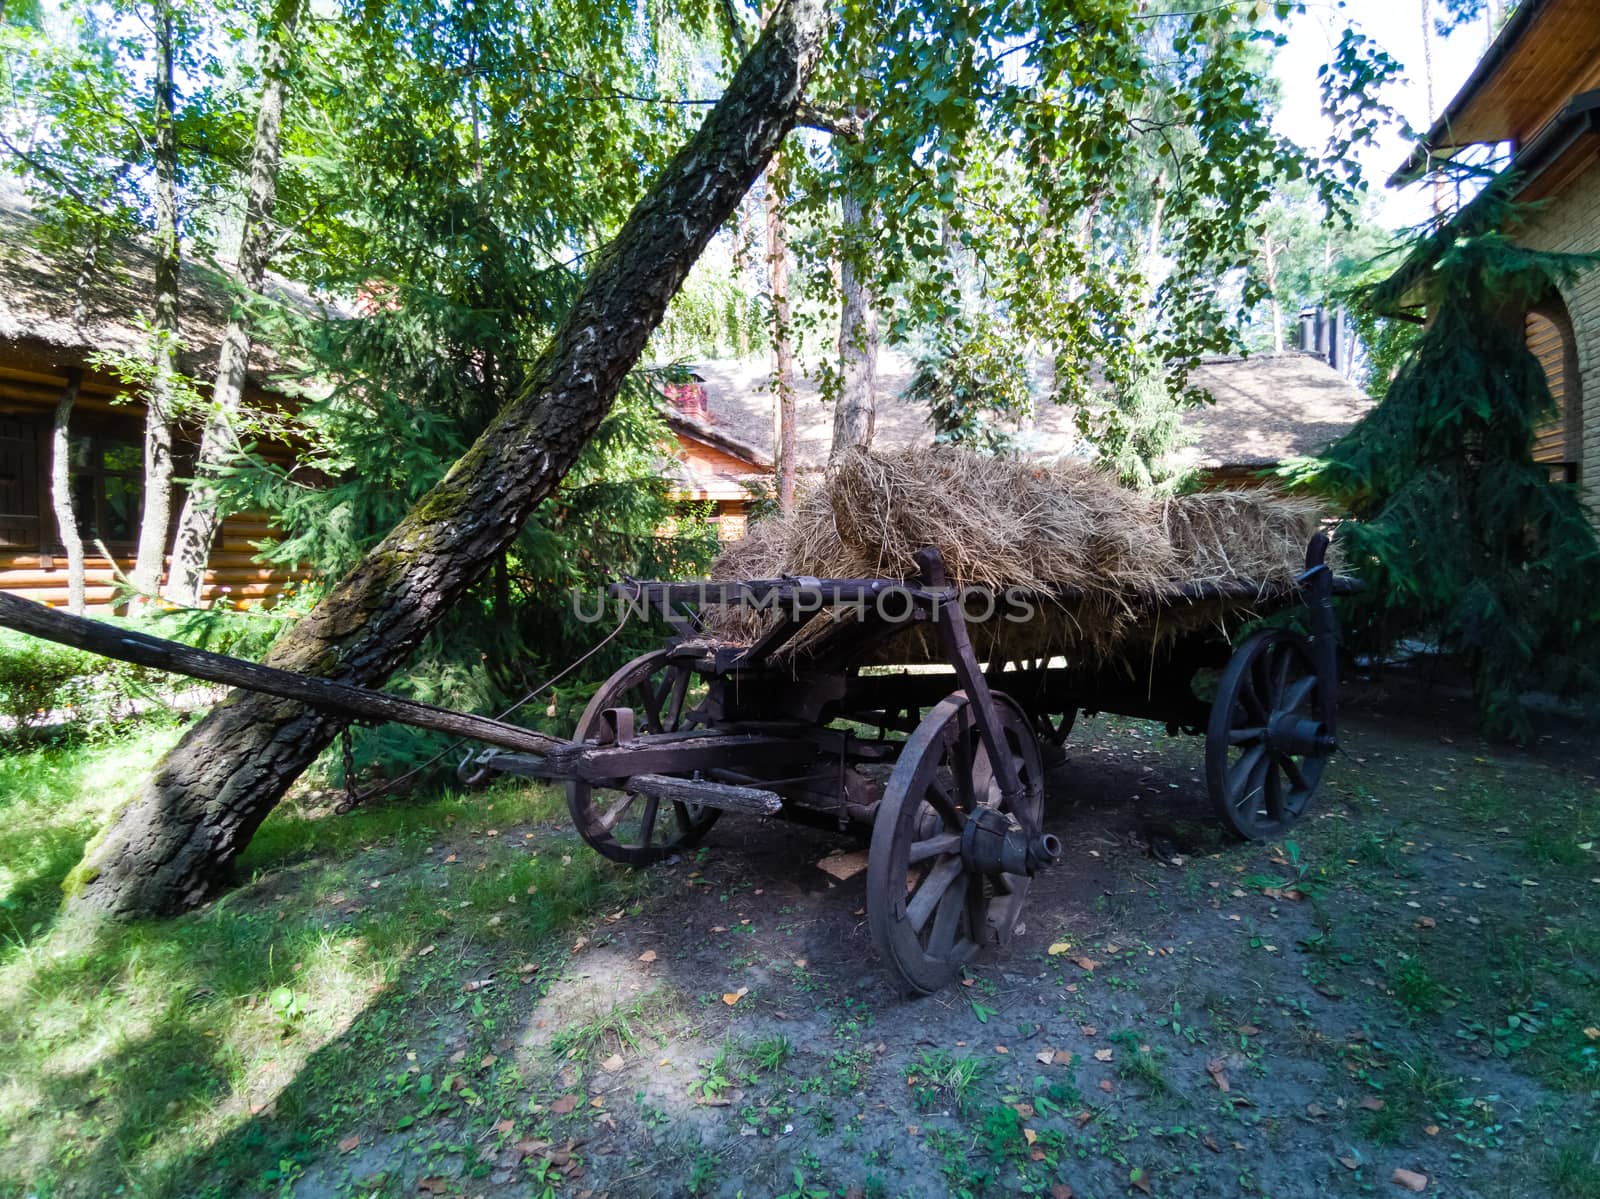 A close up of a horse drawn carriage in front of a tree. High quality photo